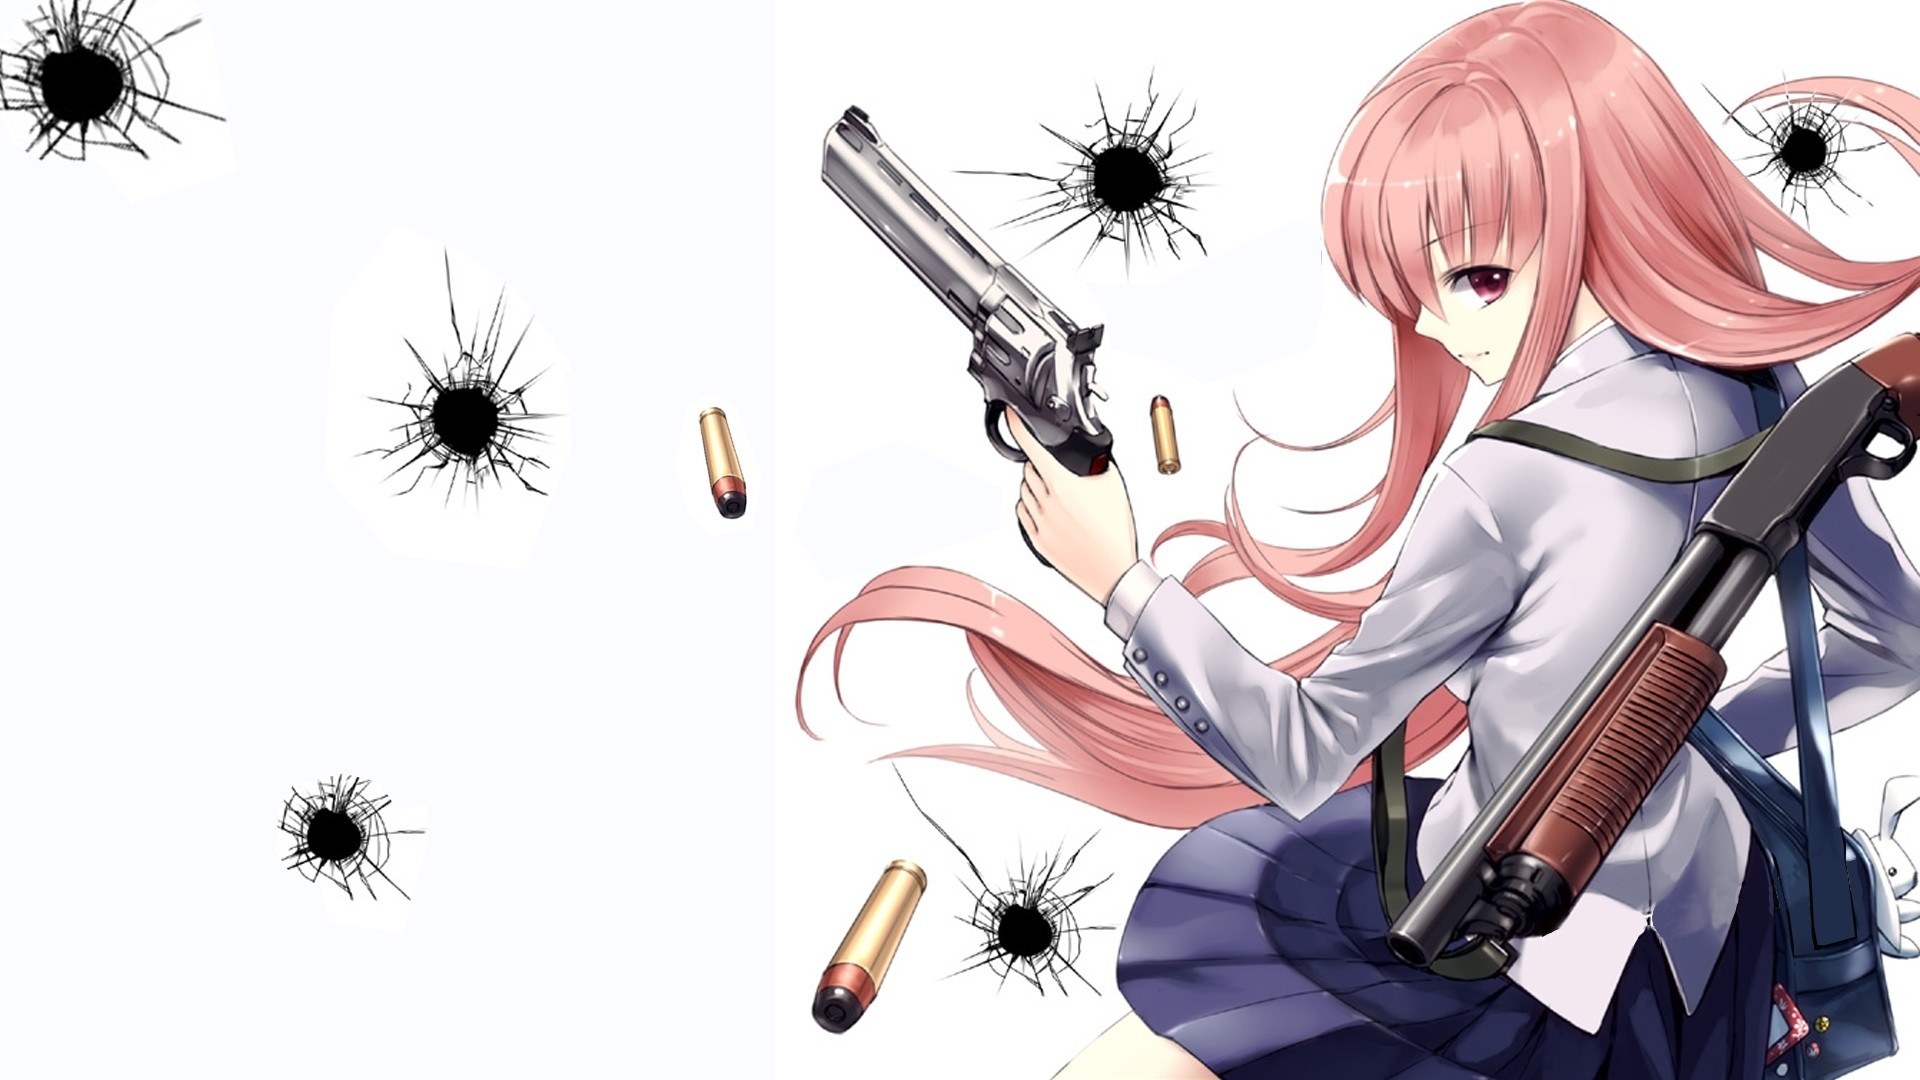 Anime Girl With Gun Wallpaper Anime Girl With Pistol Hd Wallpaper Backgrounds Download